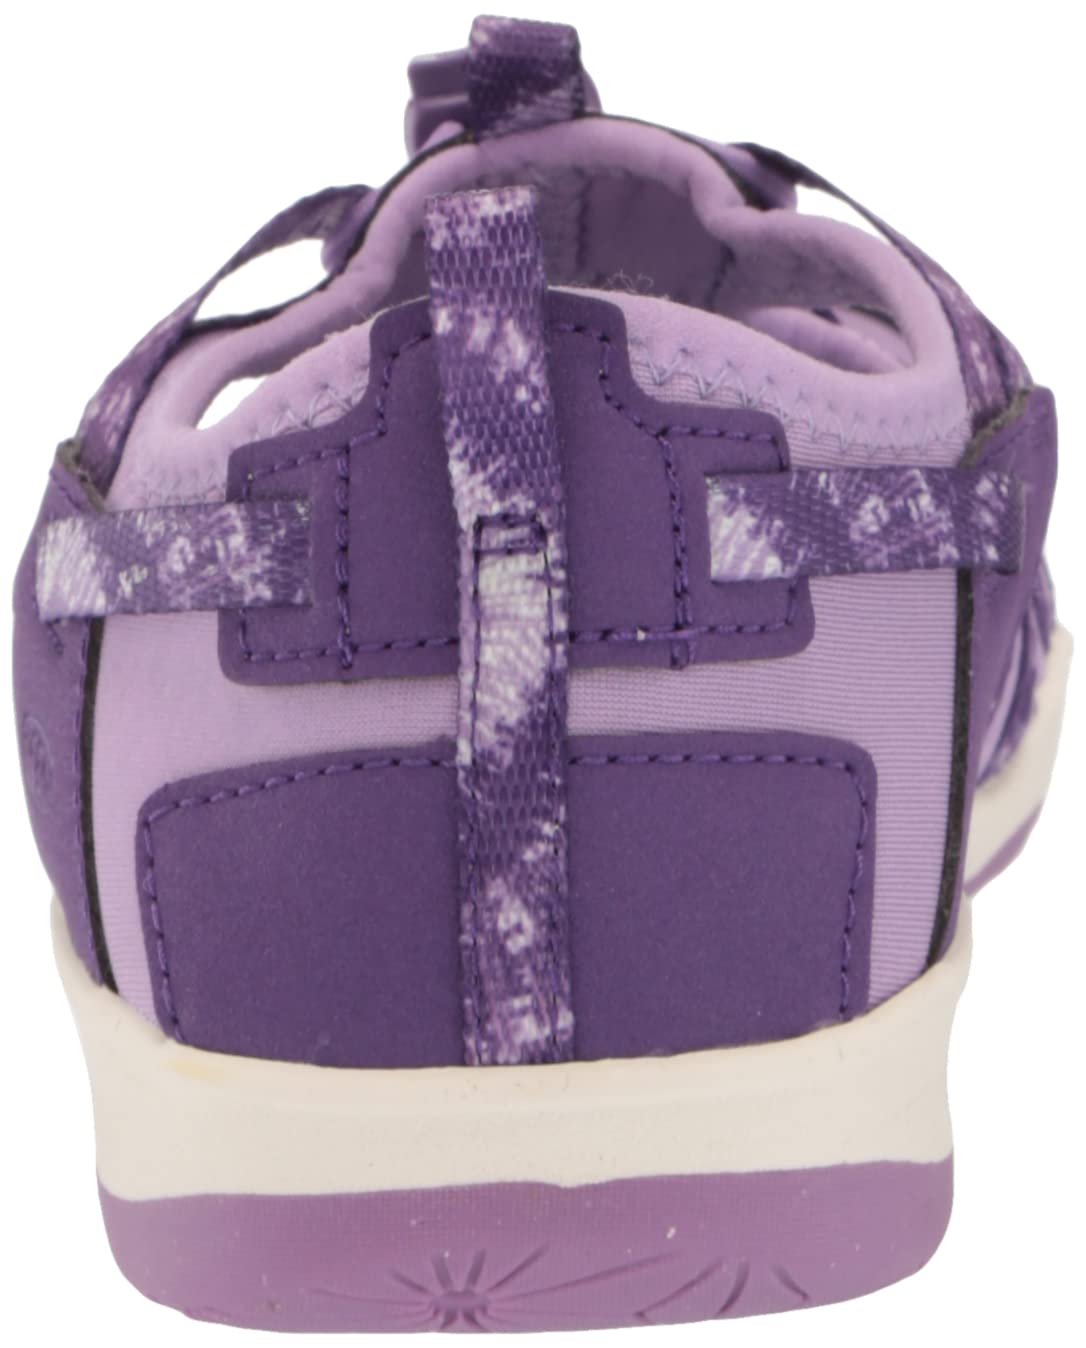 KEEN Kids Moxie Closed Toe Casual Sandals, Multi/English Lavender, 5 US Unisex Toddler